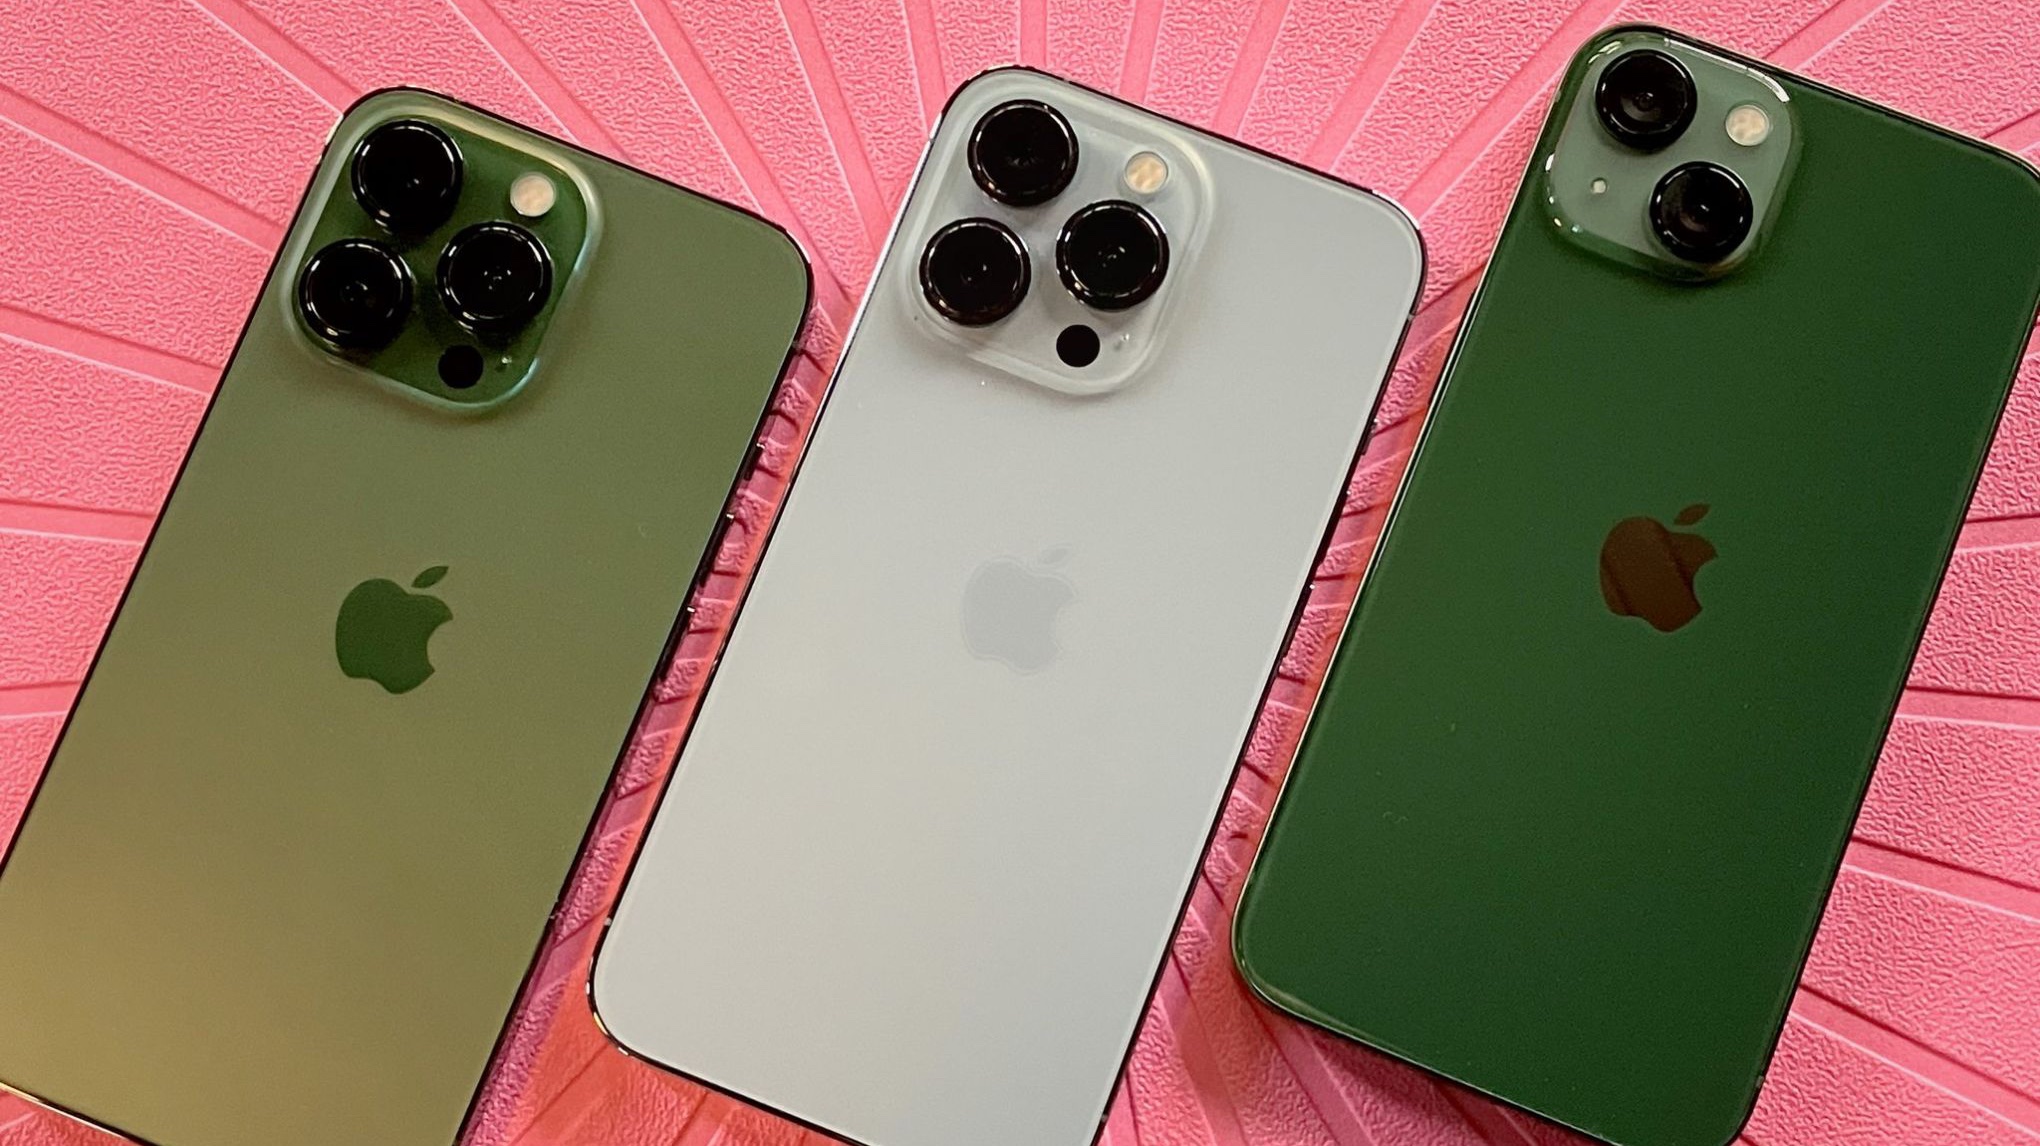 alpine green iphone 13 pro, sierra blue iphone 13 pro, green iphone 13 pink placemat with camera bump facing down